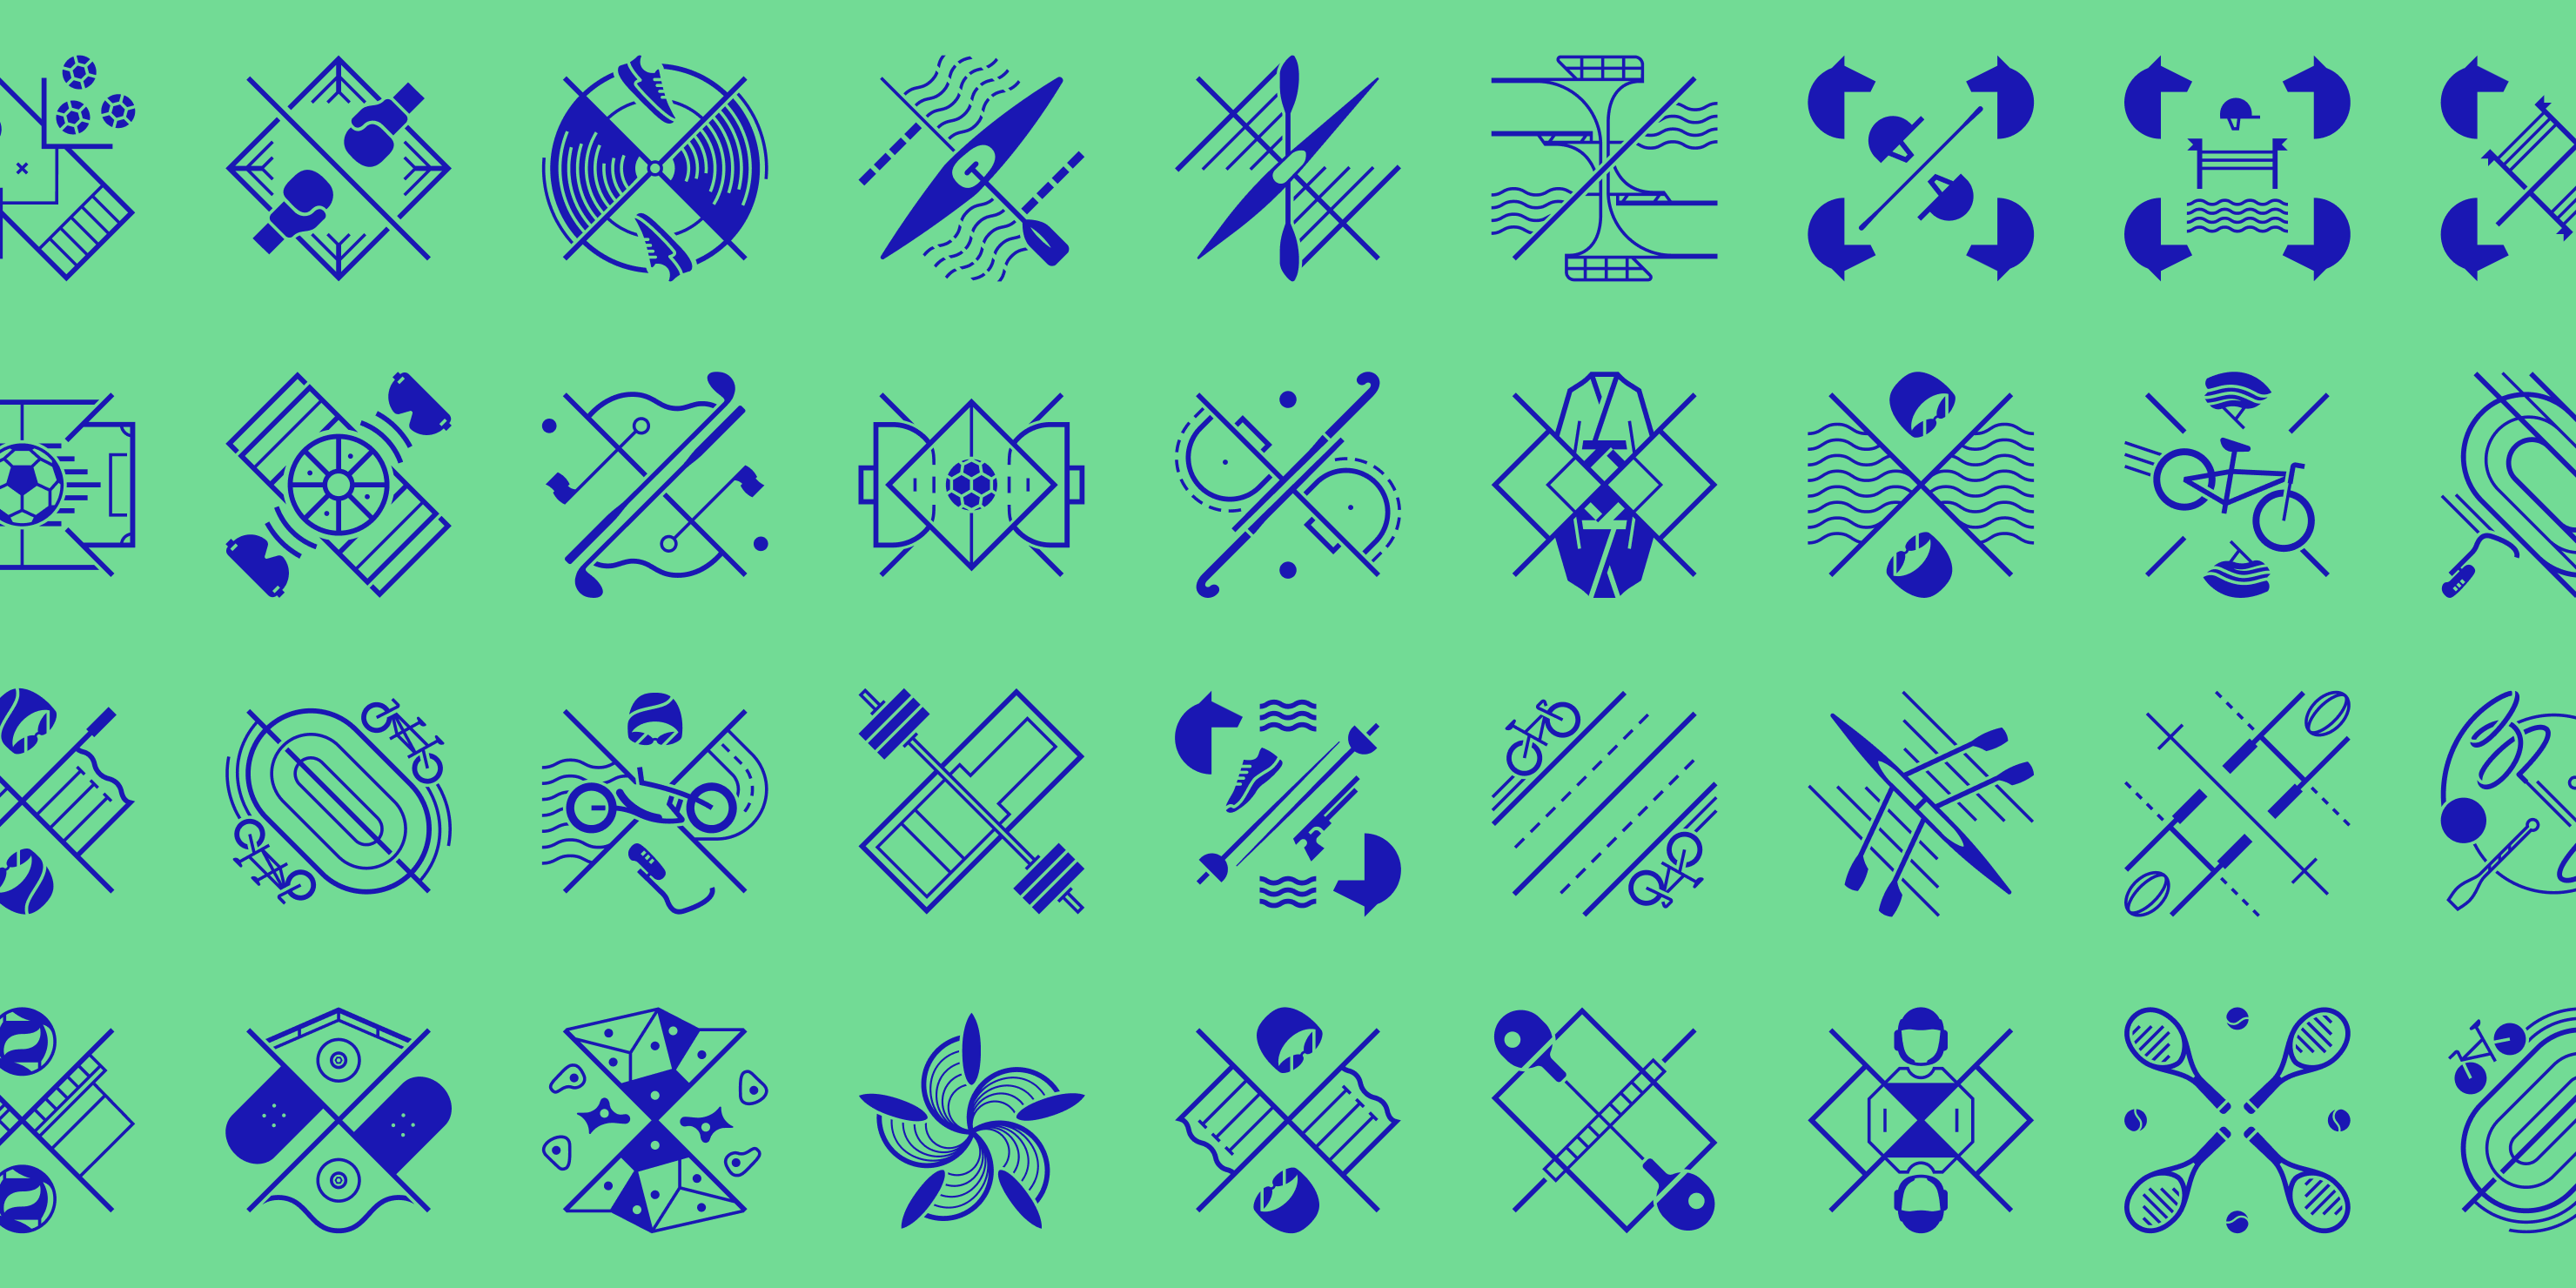 Tokyo 2020 unveils kinetic sports pictograms - Olympic News